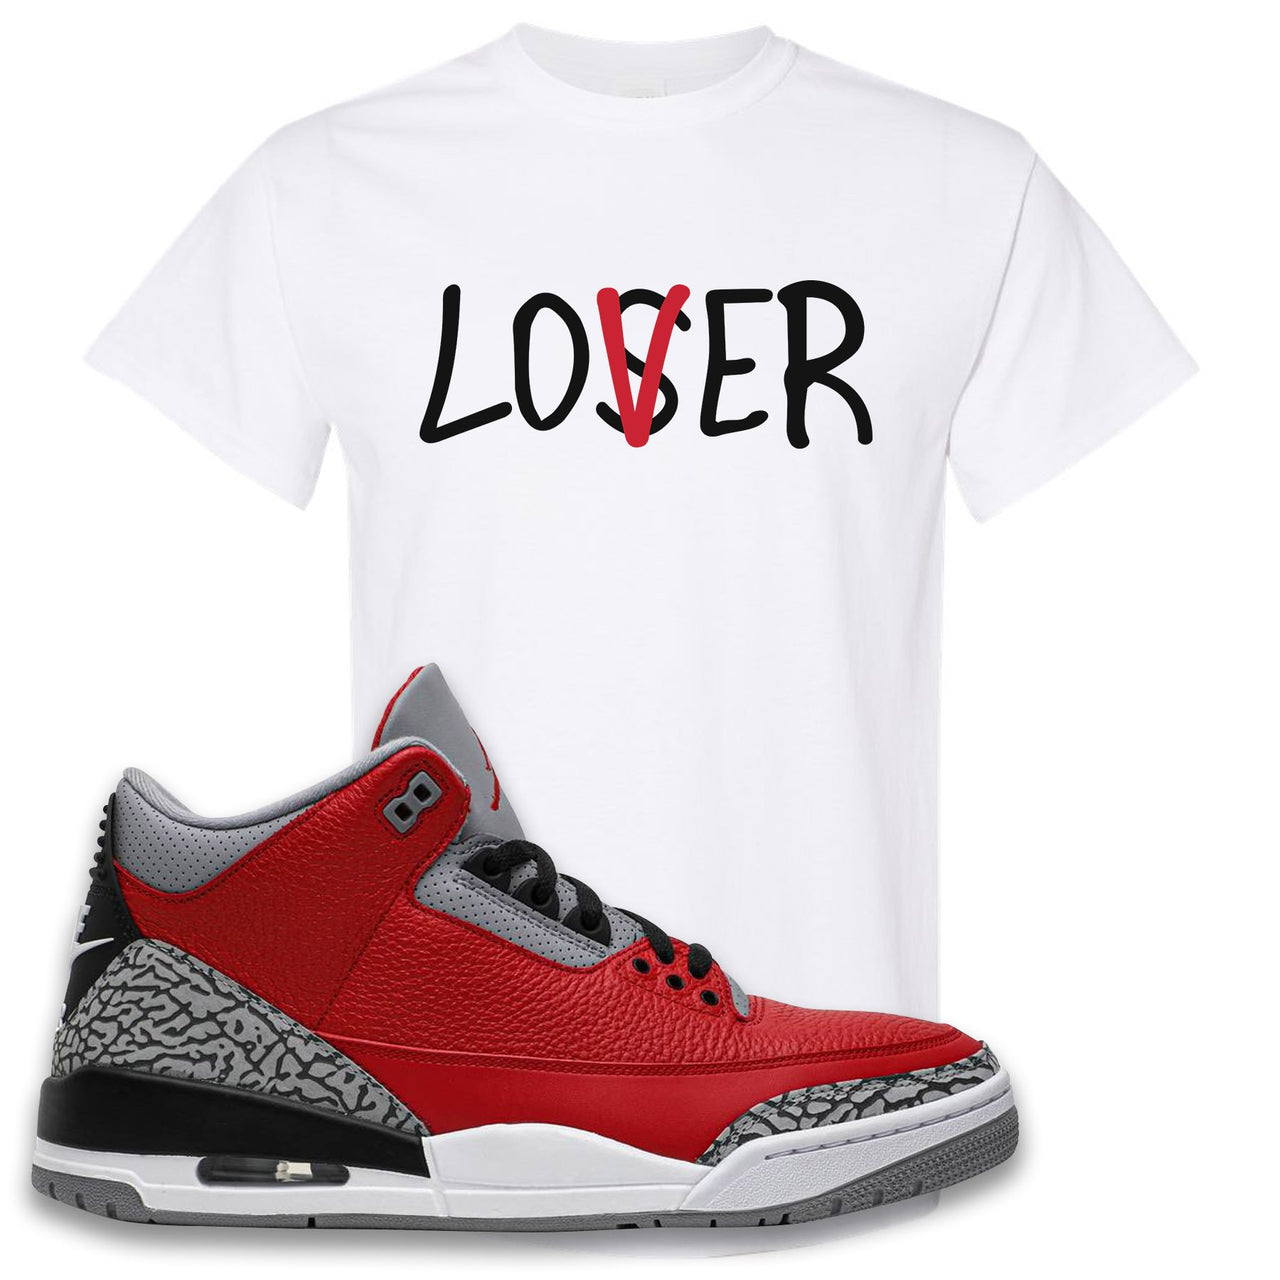 Jordan 3 Red Cement Chicago All-Star Sneaker White T Shirt | Tees to match Jordan 3 All Star Red Cement Shoes | Lover